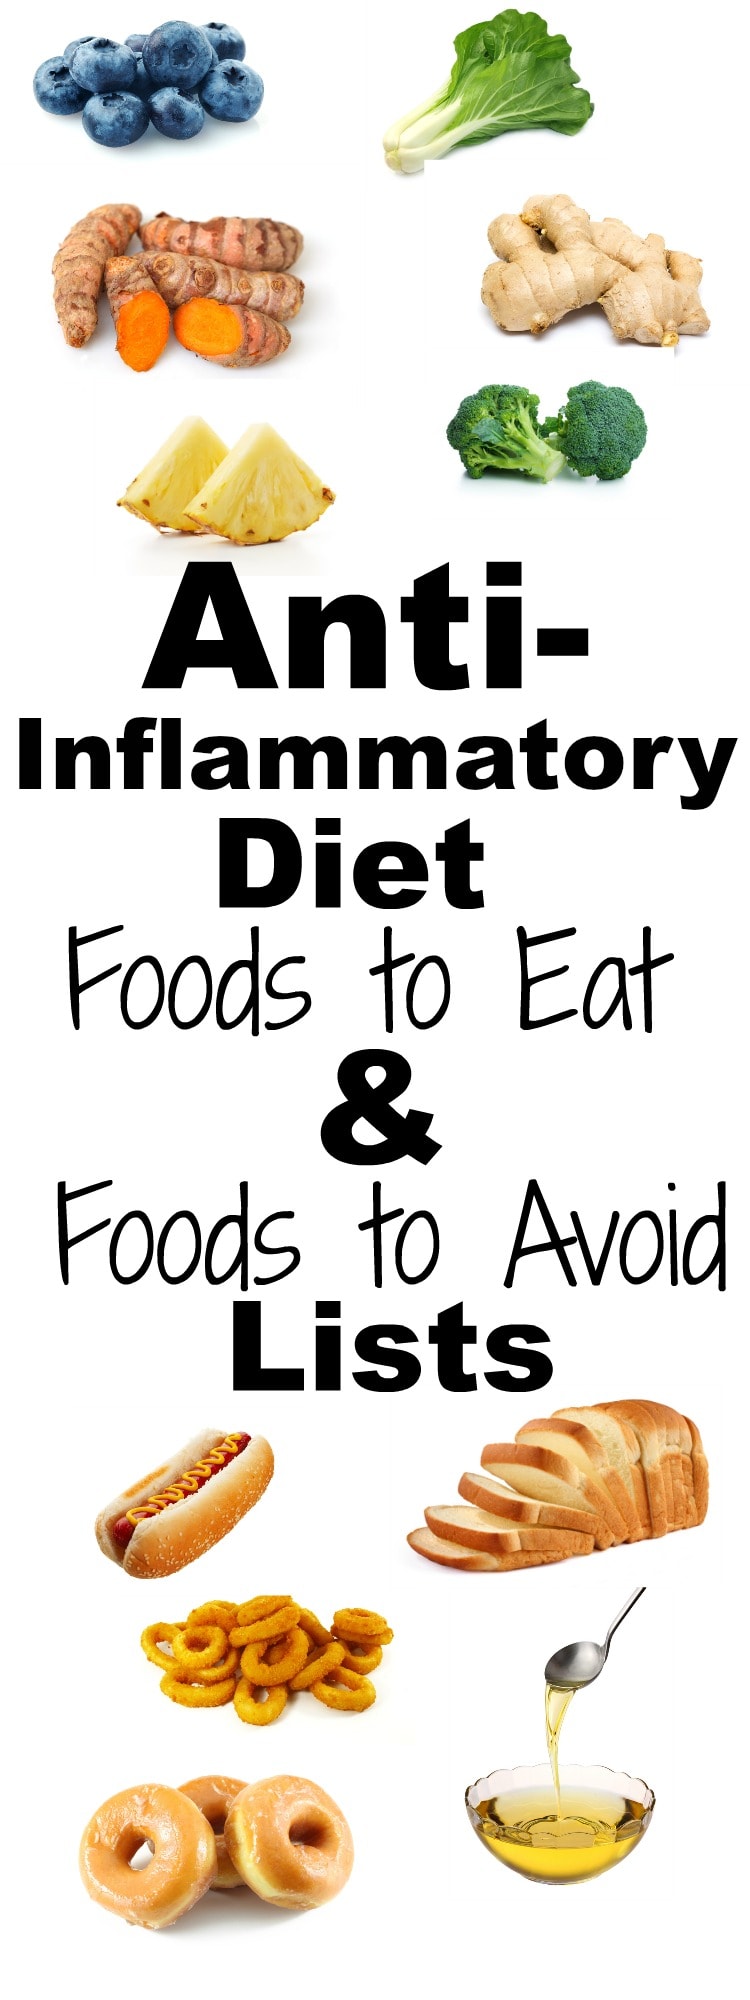 What are some anti-inflammatory foods?